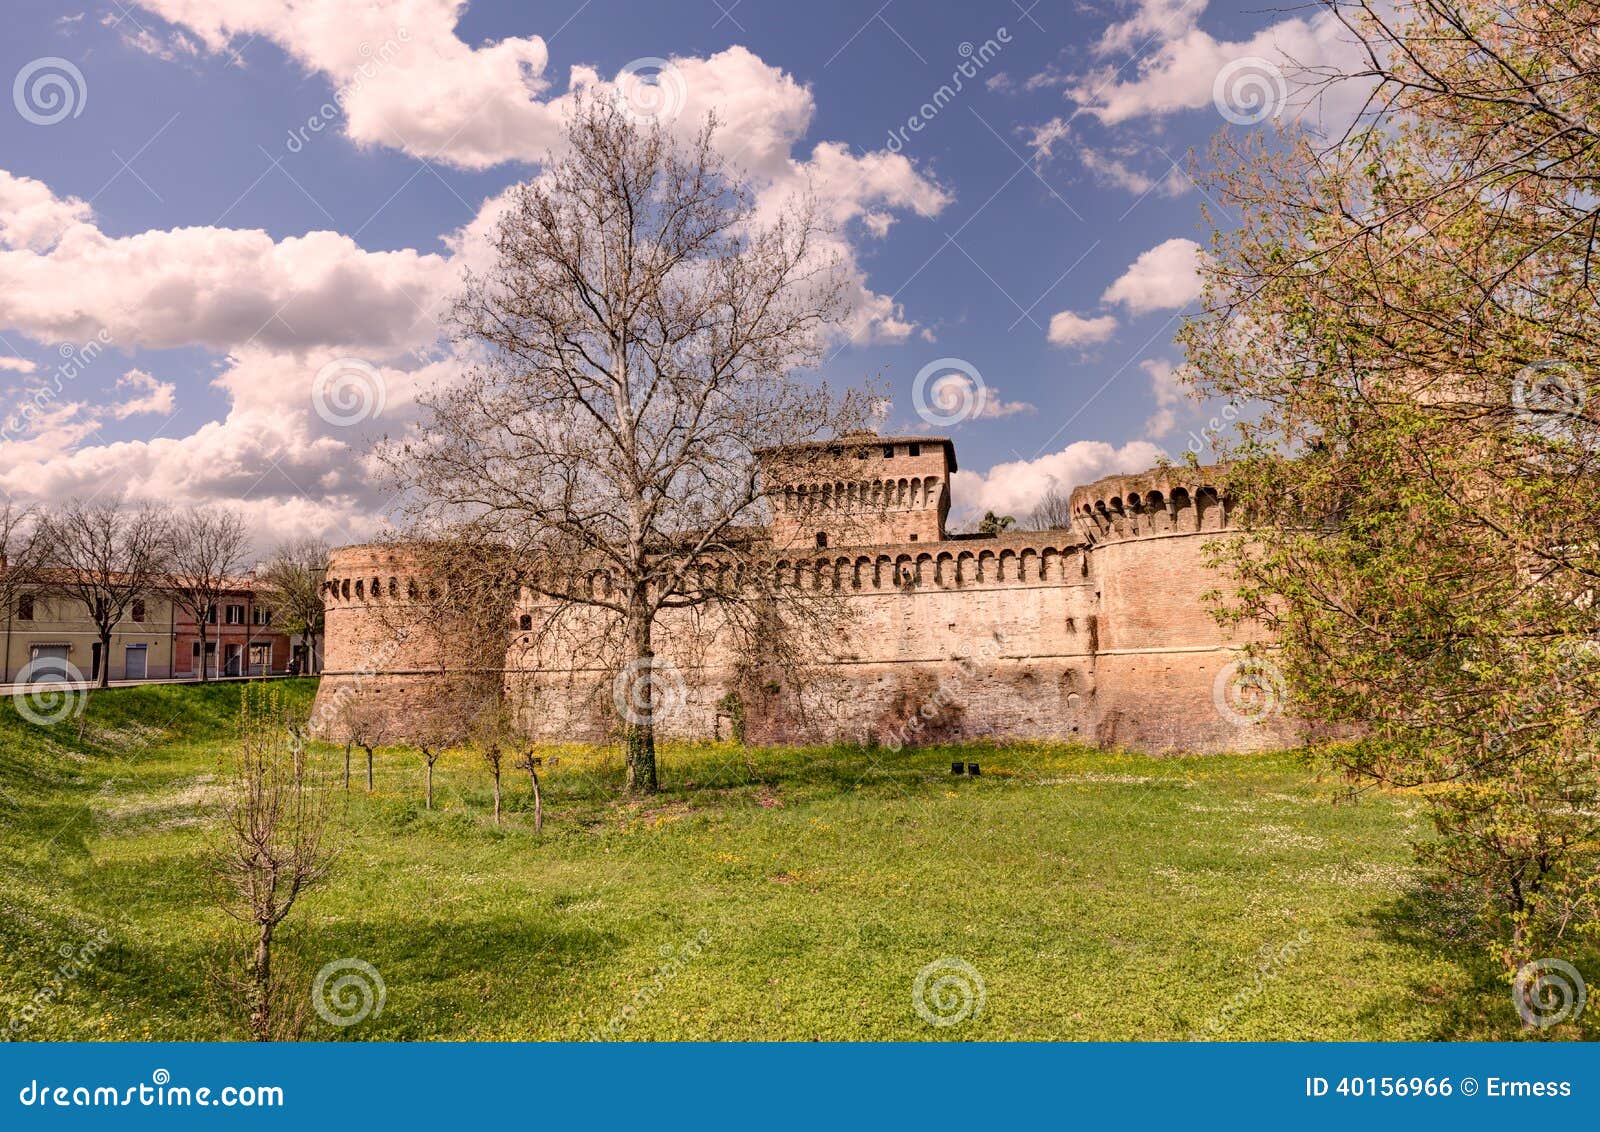 fortress of forlÃÂ¬, emilia romagna, italy